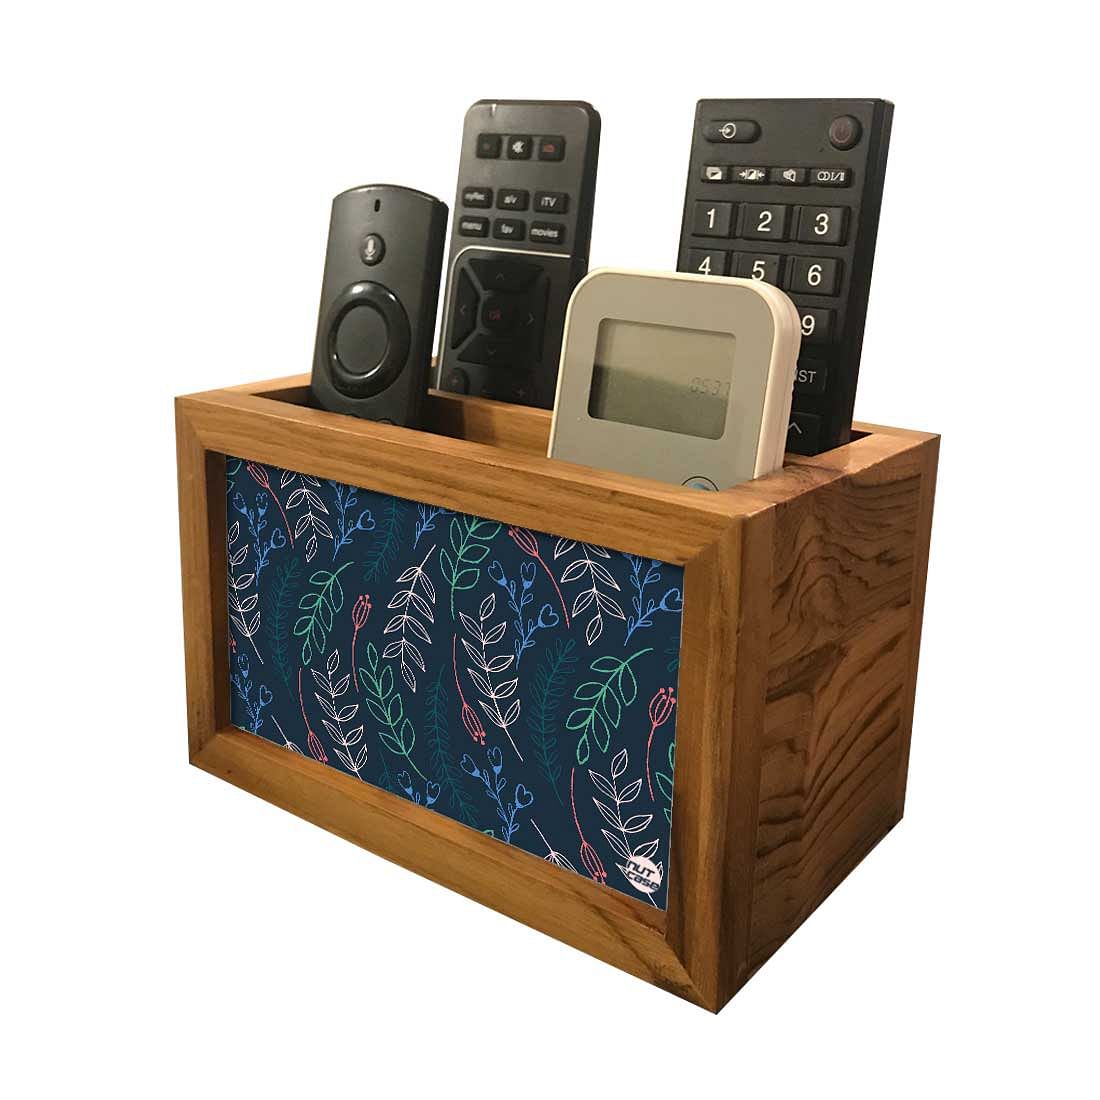 Beautiful Tv Remote Holder Organizer - Leaves And Branches - Blue Nutcase